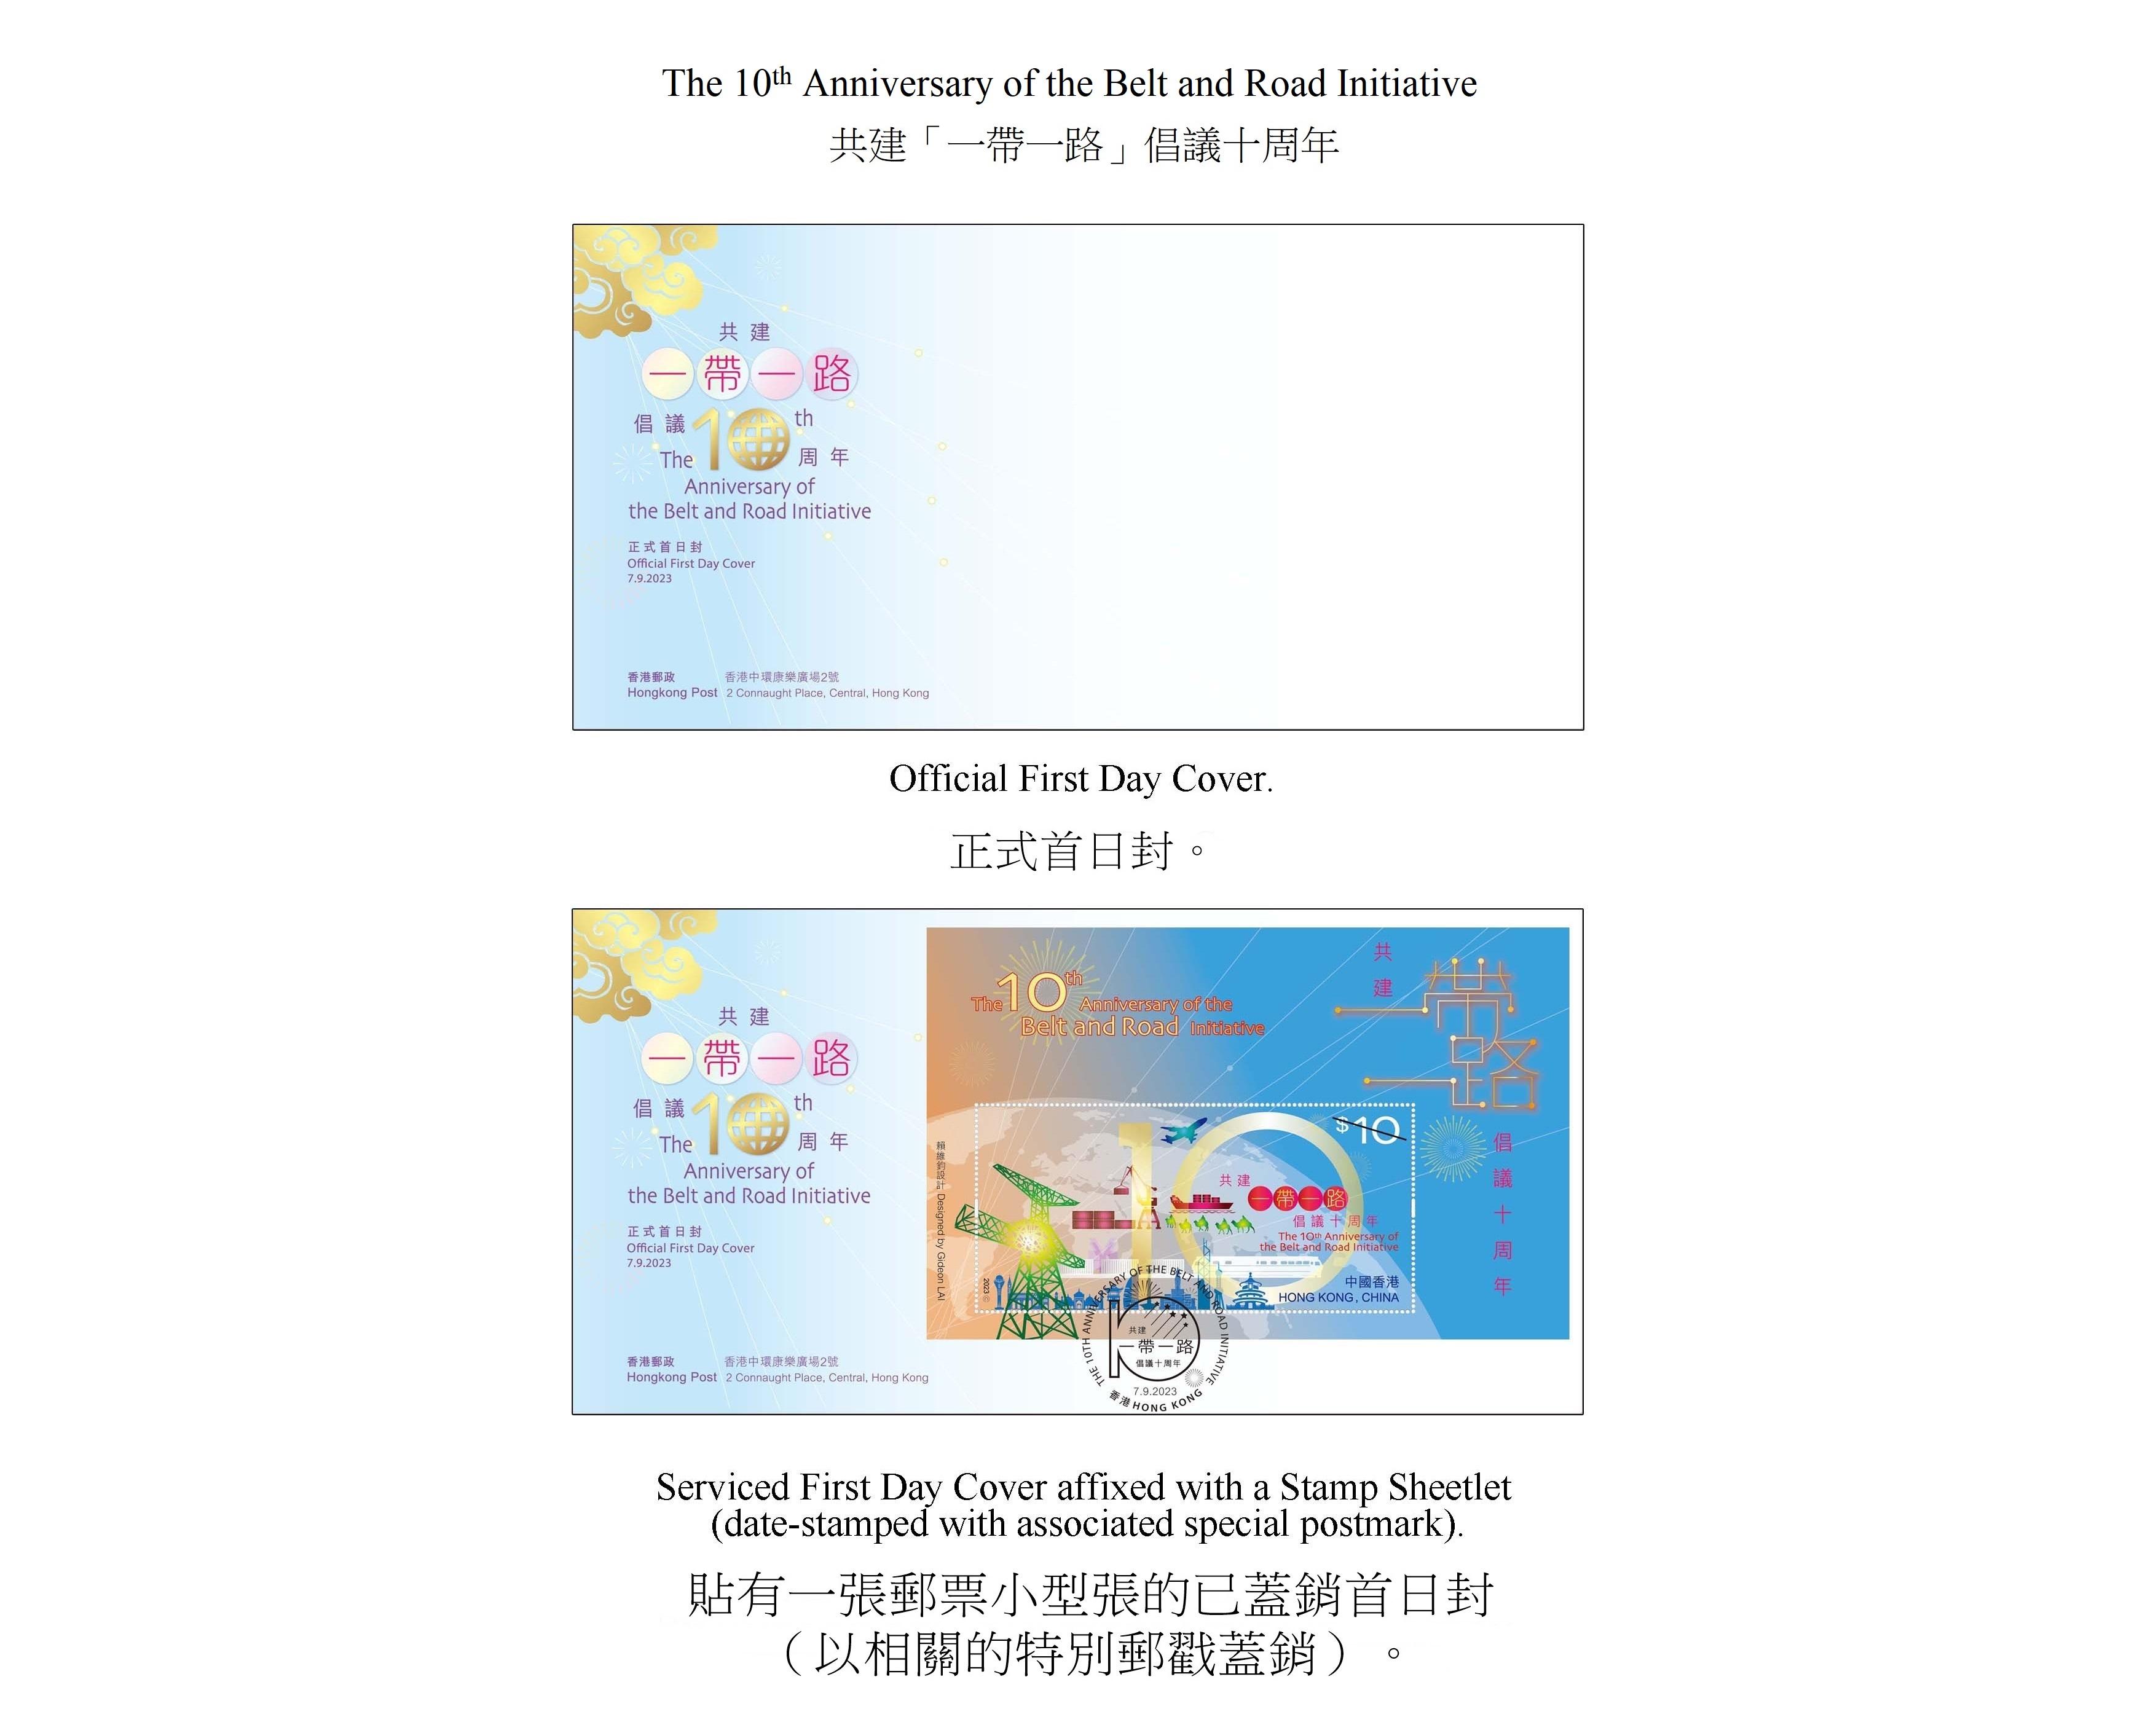 Hongkong Post will launch a commemorative stamp issue and associated philatelic products on the theme of "The 10th Anniversary of the Belt and Road Initiative" on September 7 (Thursday). Photos show the first day covers.

